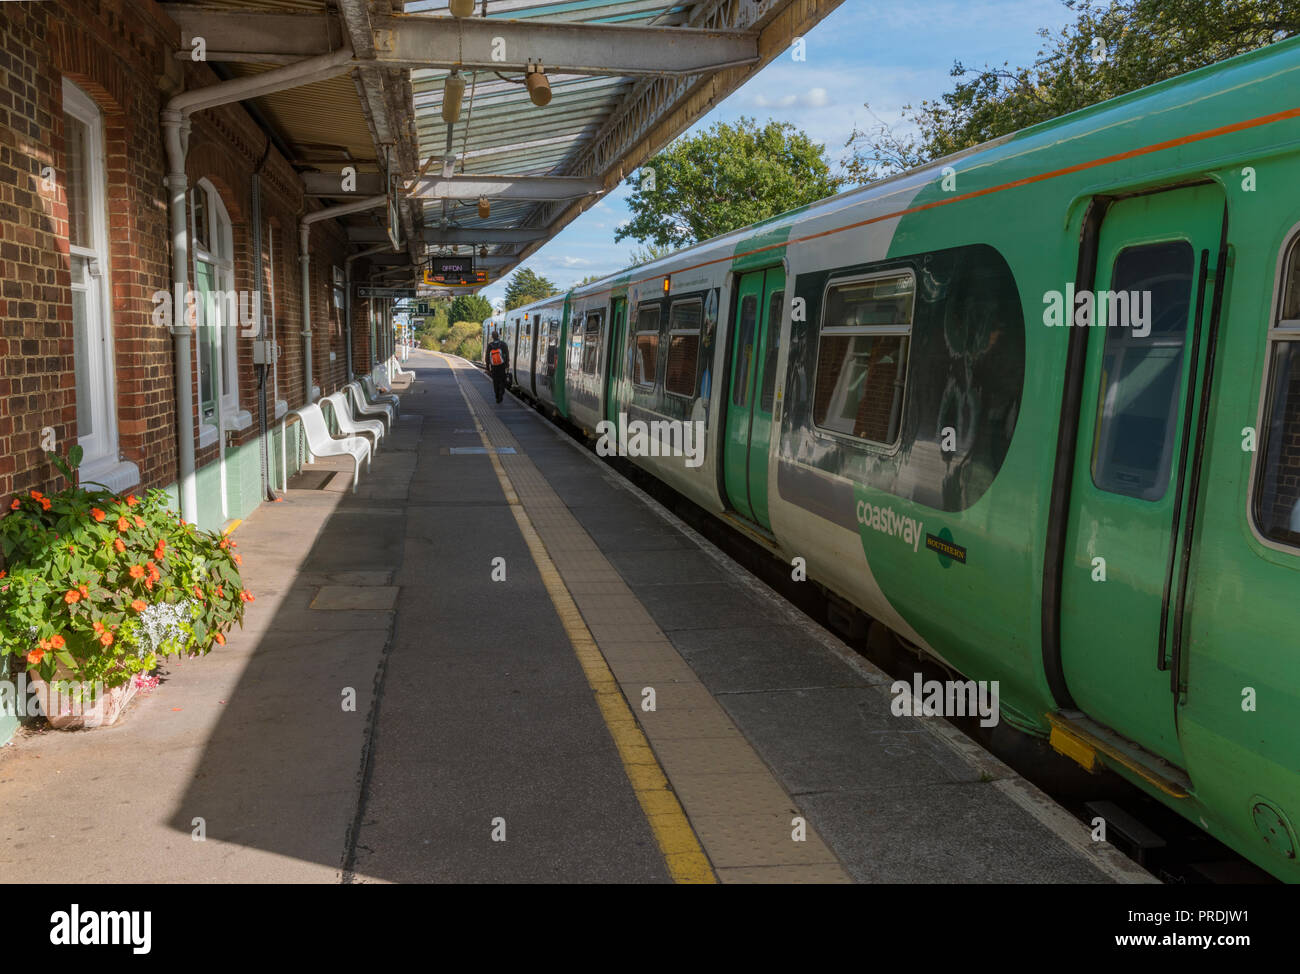 southern railway train in the platform at Barnham station in west sussex. Stock Photo